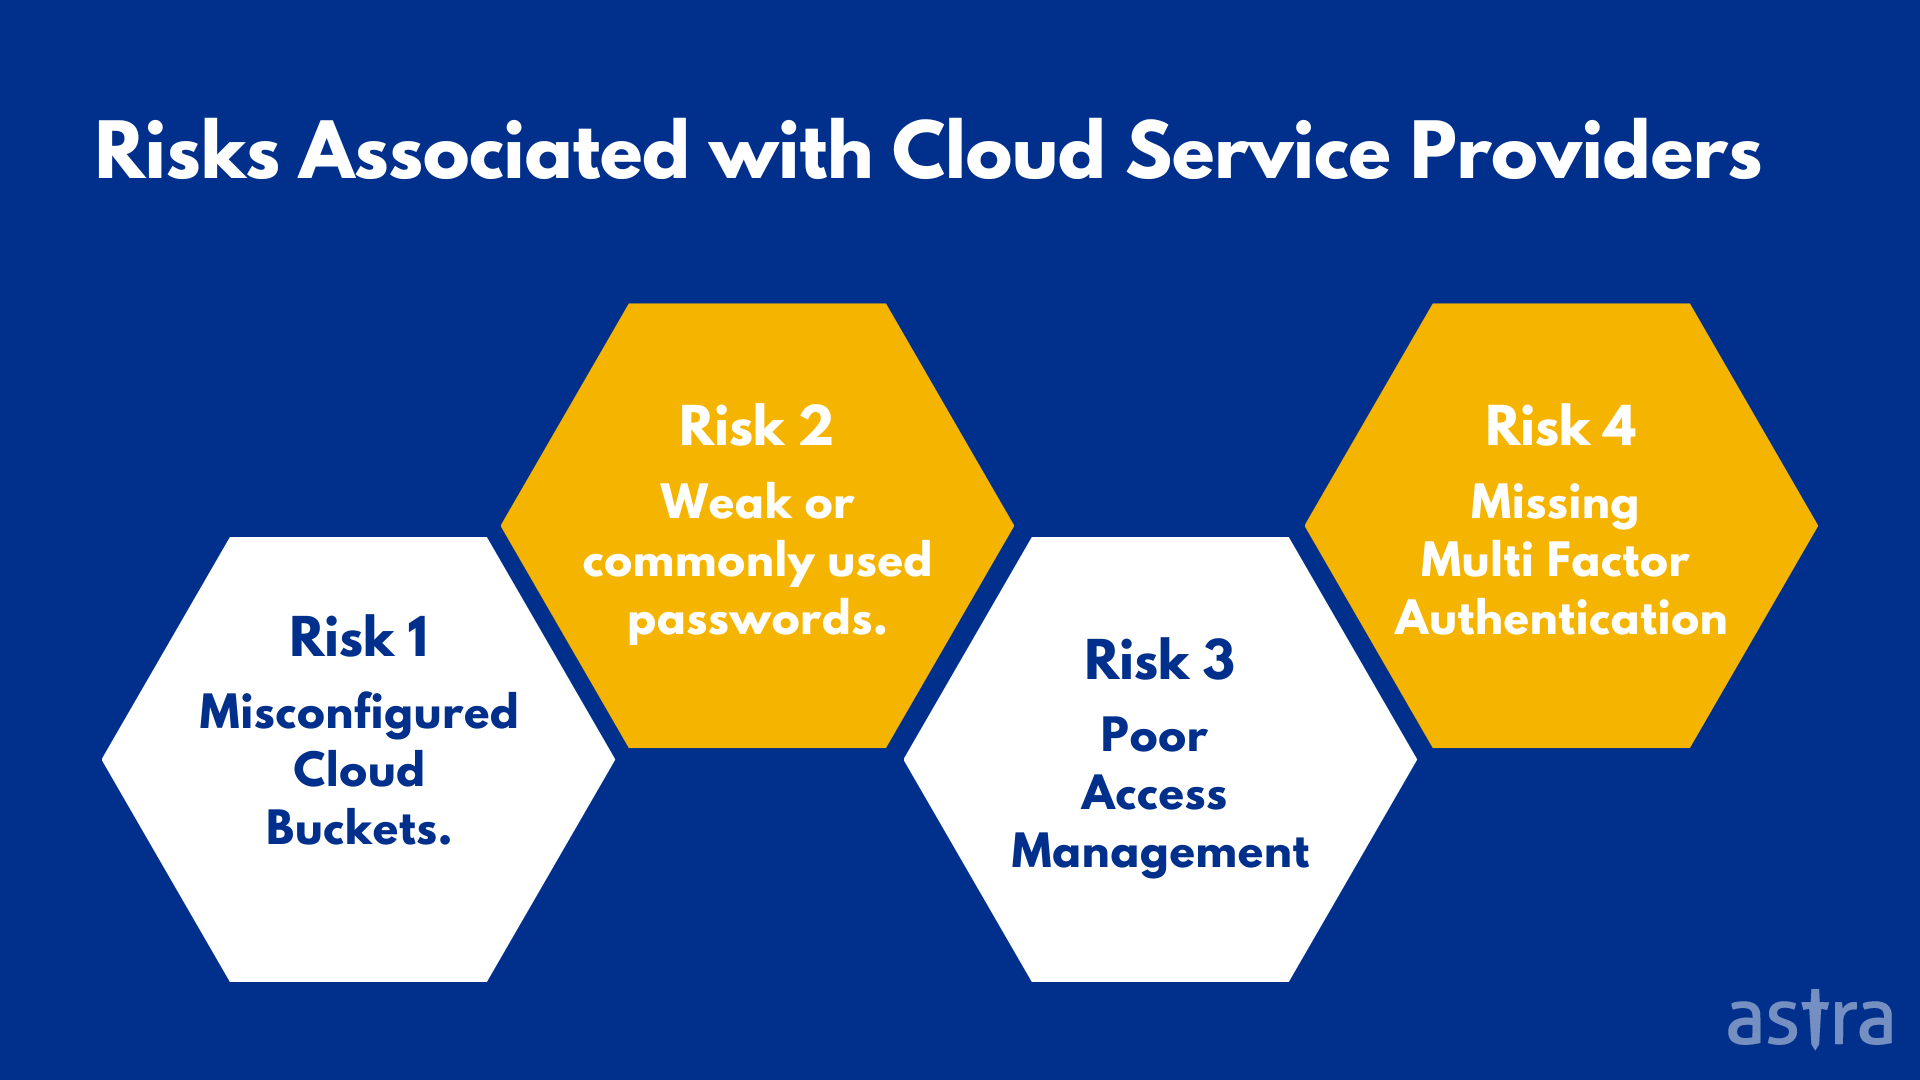 Risks Associated with Cloud Providers